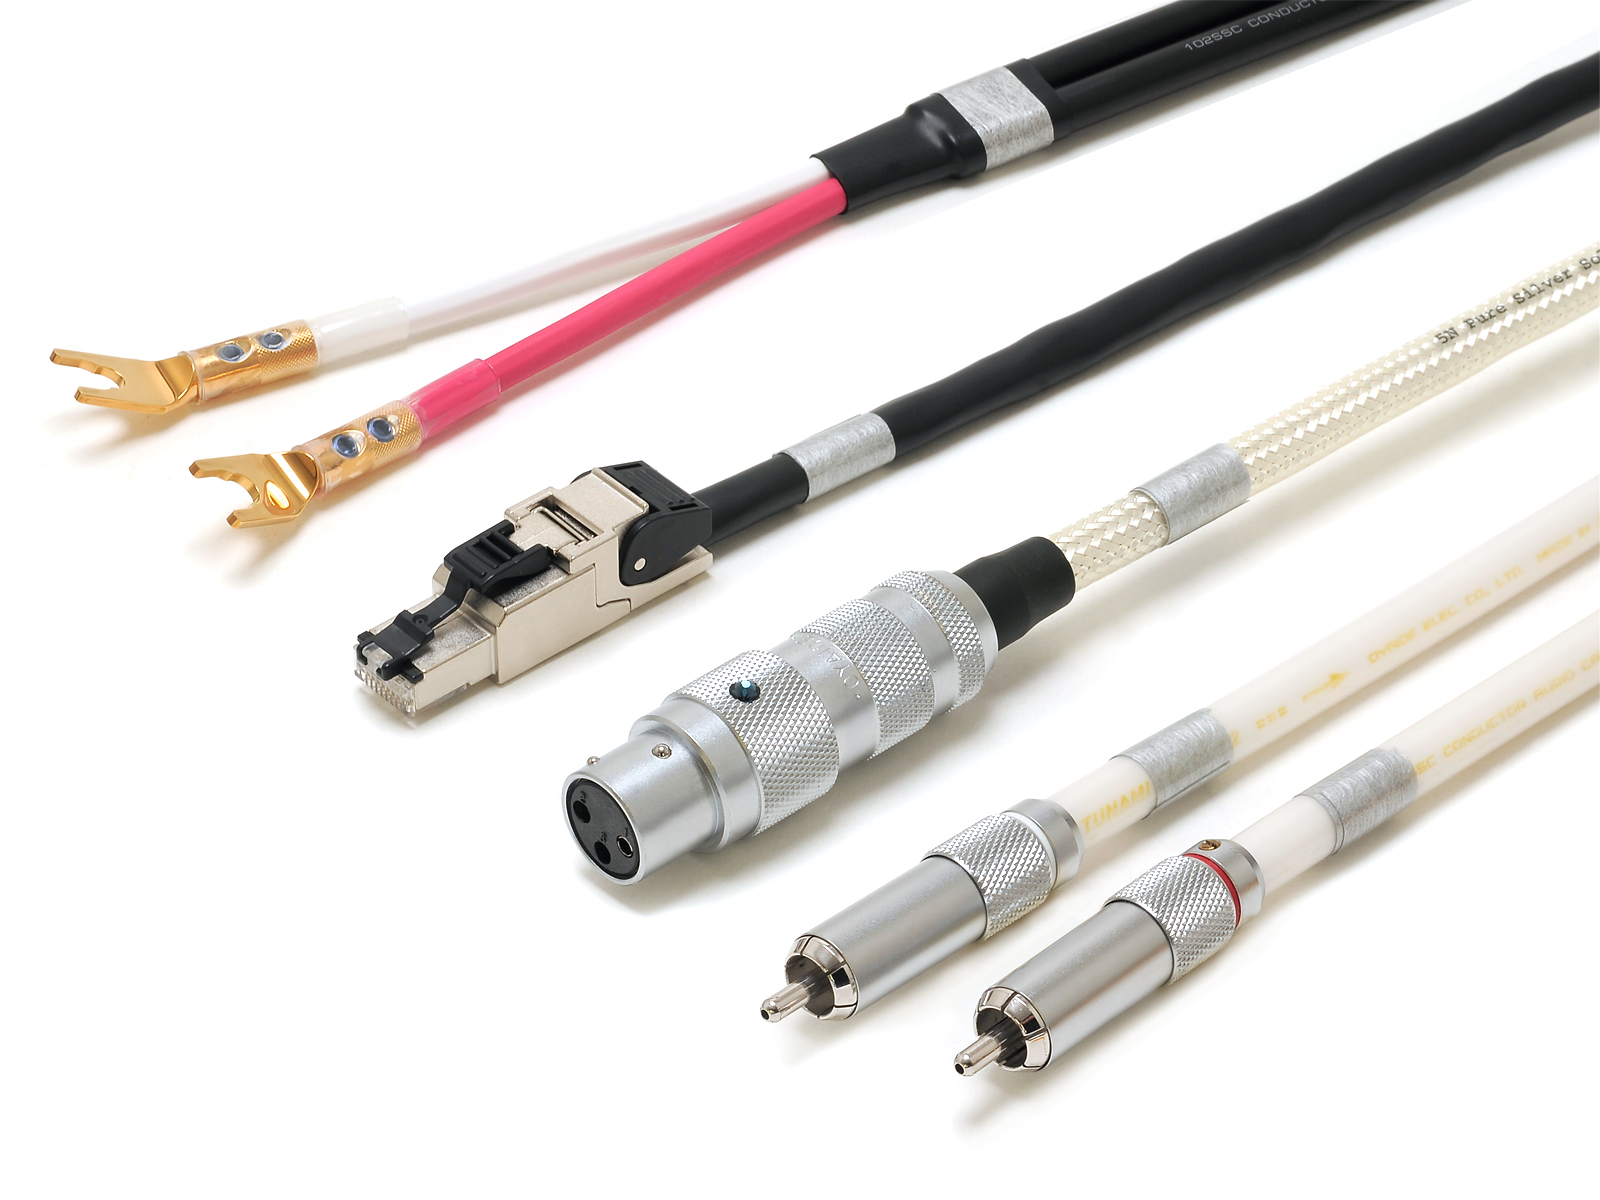 nrf-005t_image_cable_1600.jpg